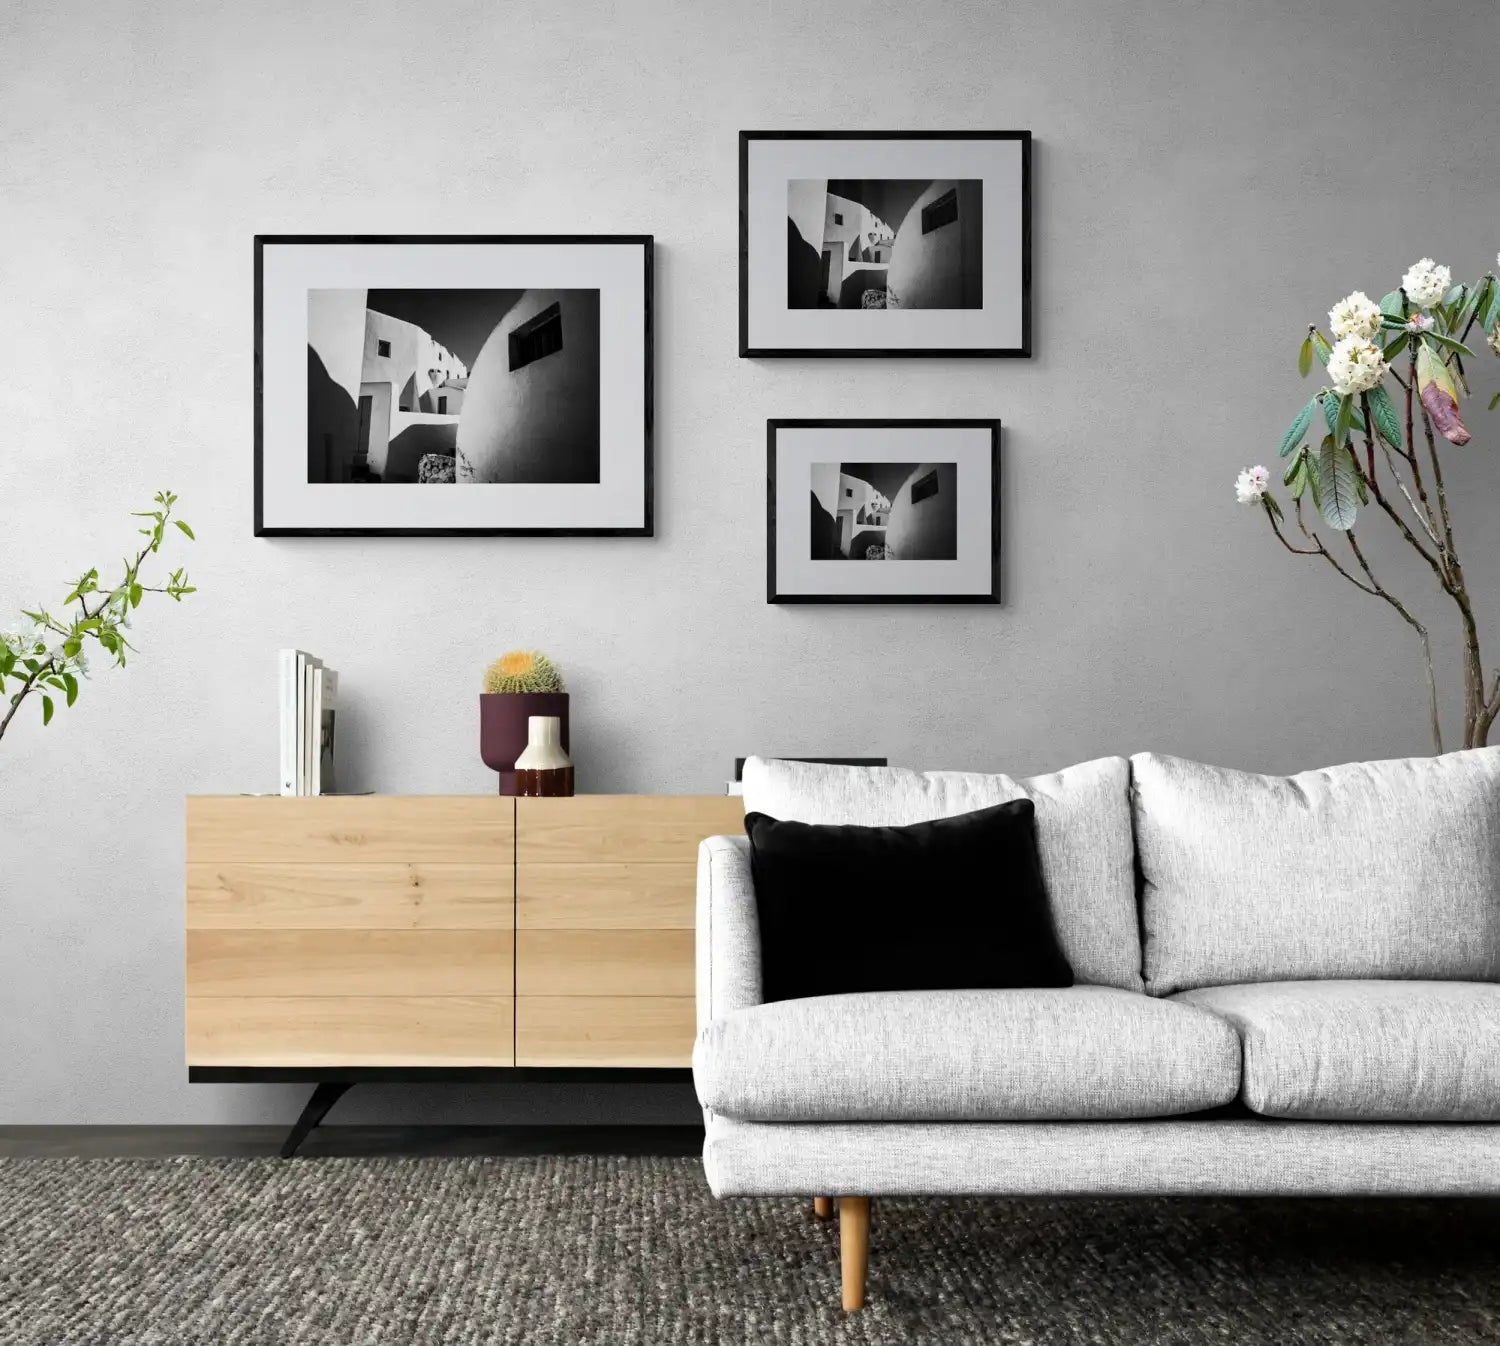 Forms at Emporio | Santorini | Chorōs | Black-and-white wall art photography from Greece - framing options